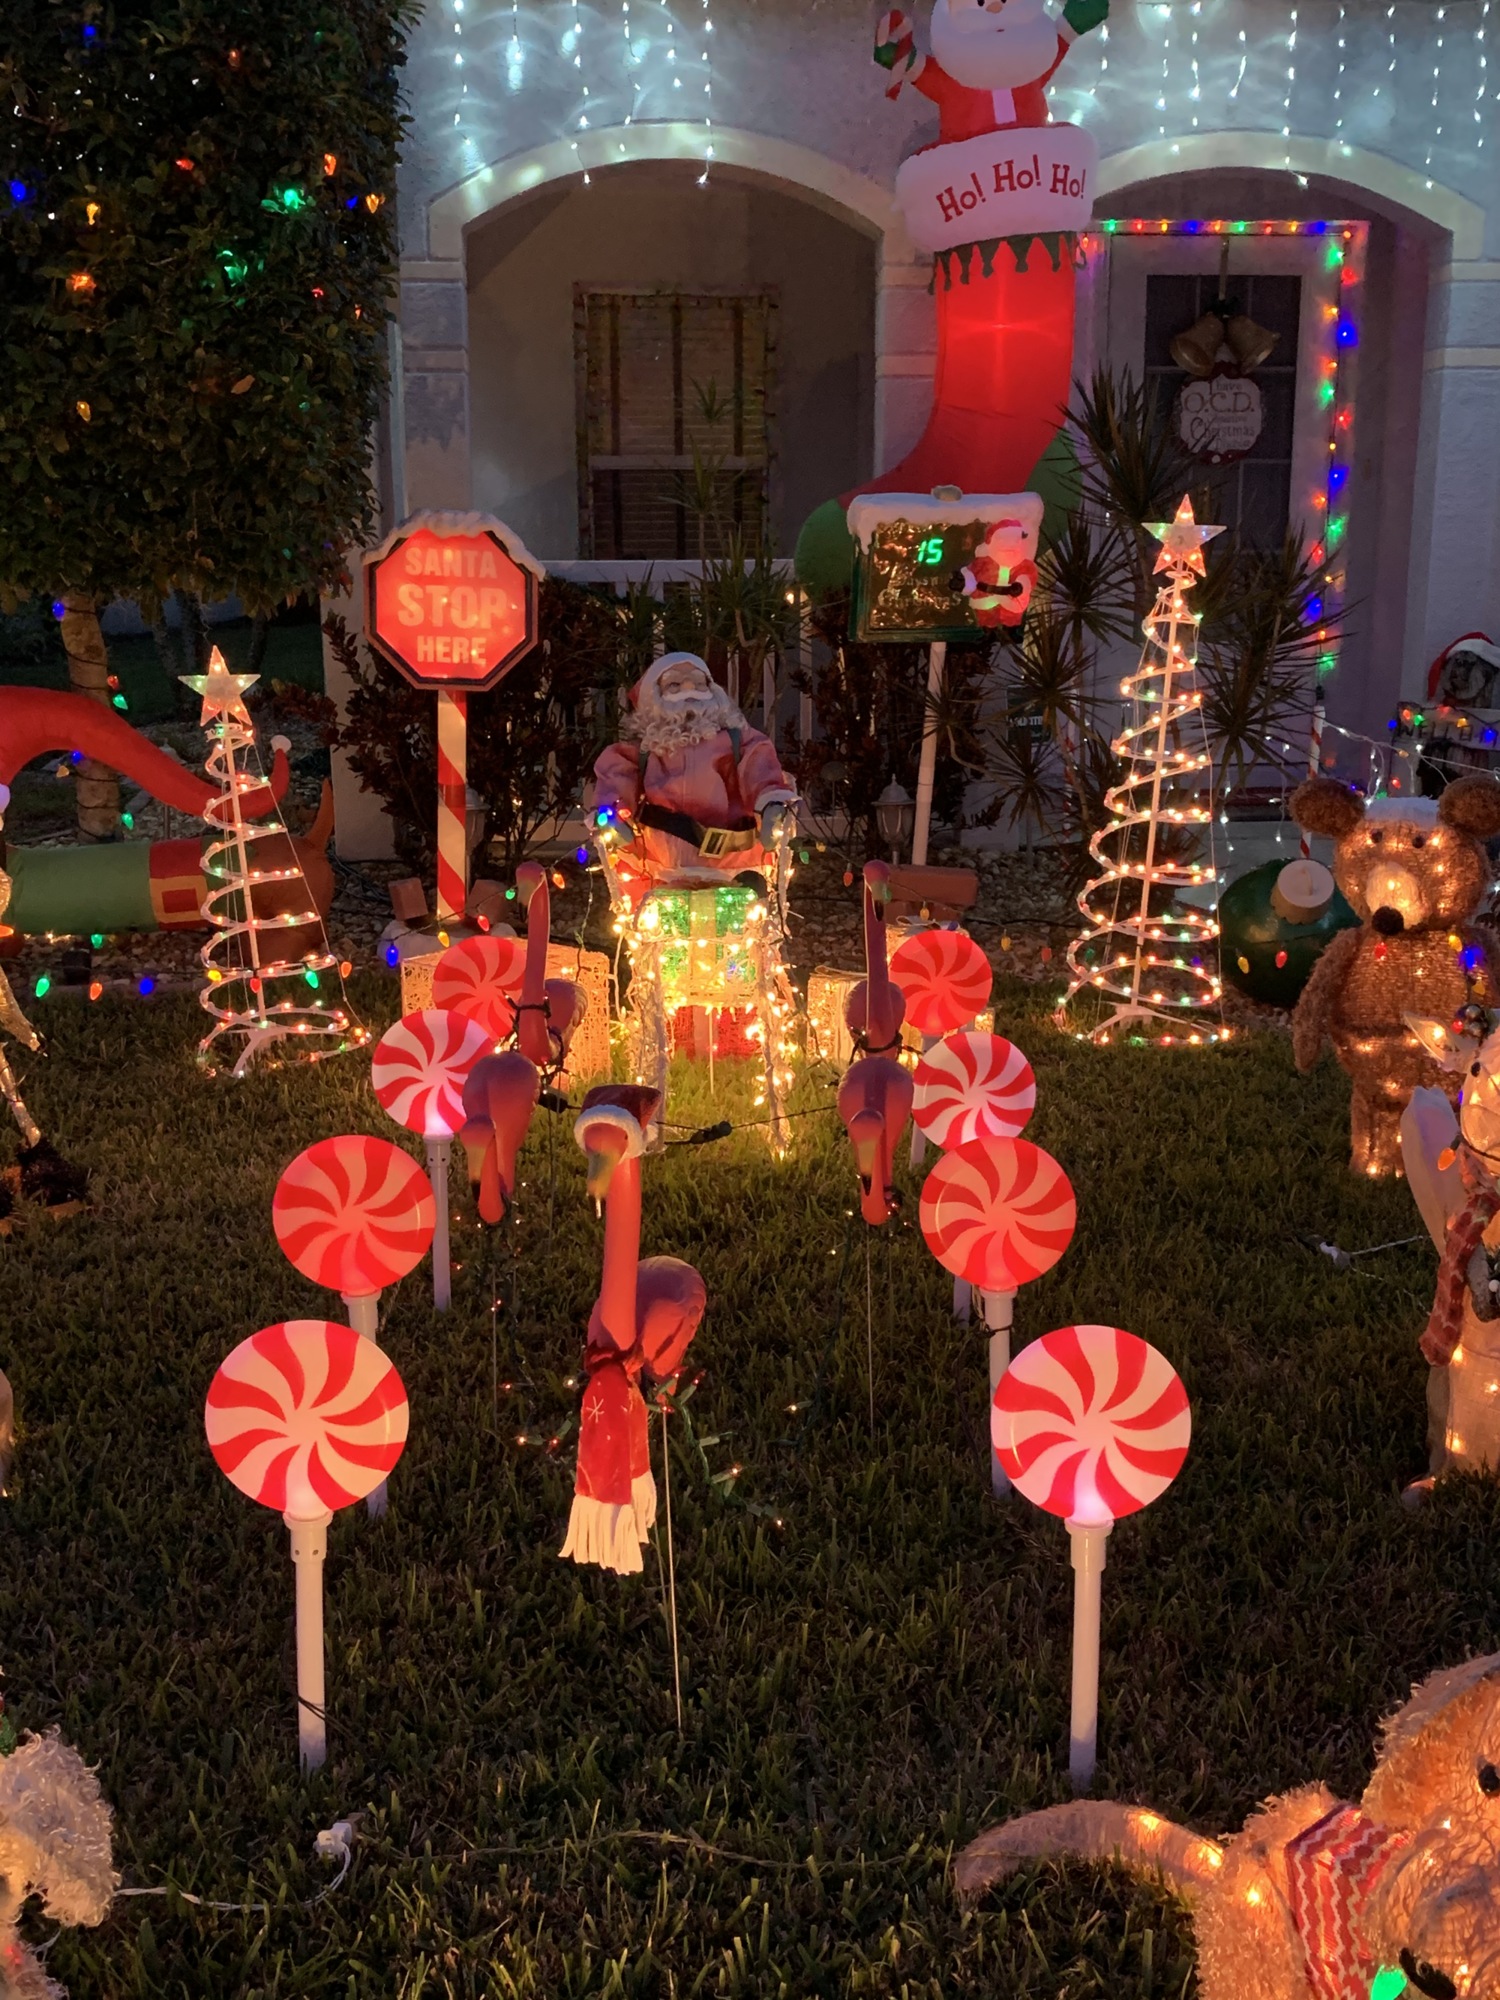 Ray Papiano's favorite aspect of his display is the flamingos flying Santa's sleigh. Photo by Liz Ramos.